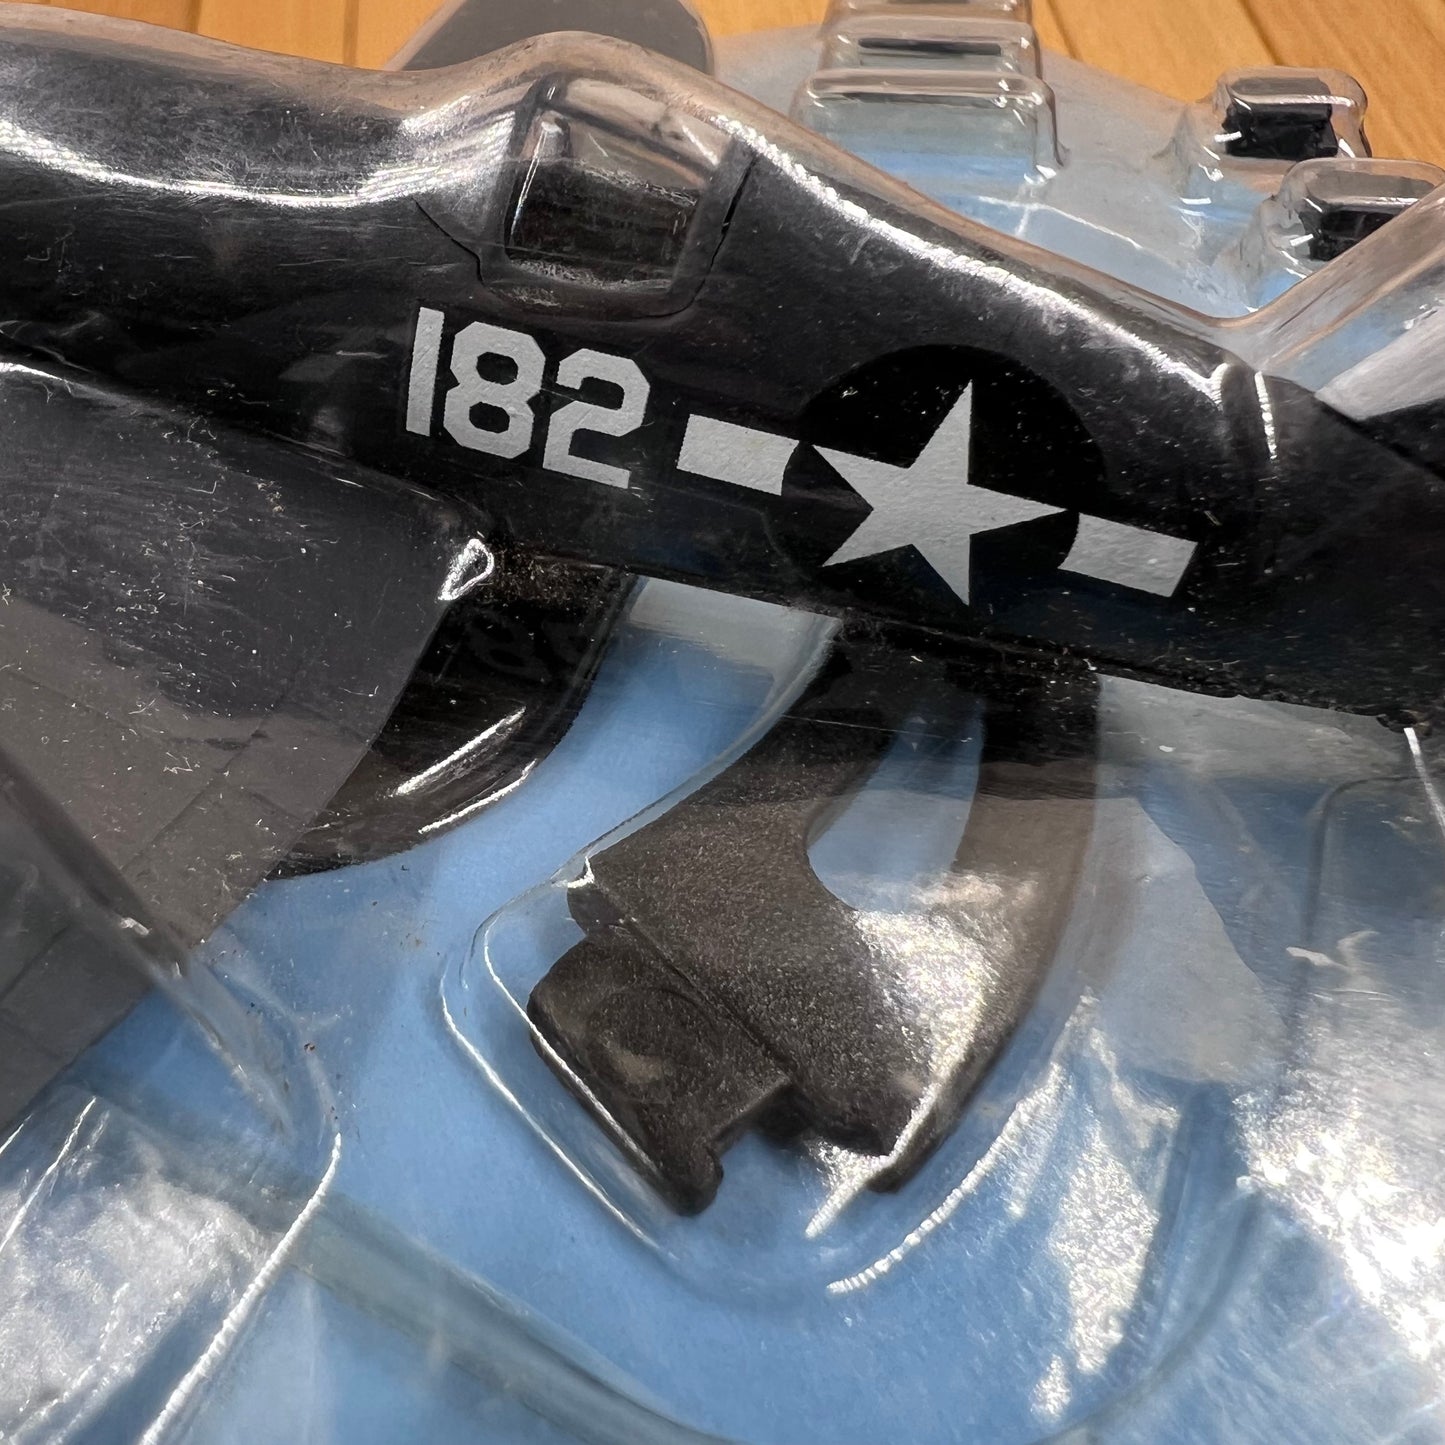 1/100 Scale Vought F4U Corsair American Fighter Diecast Aircraft Model